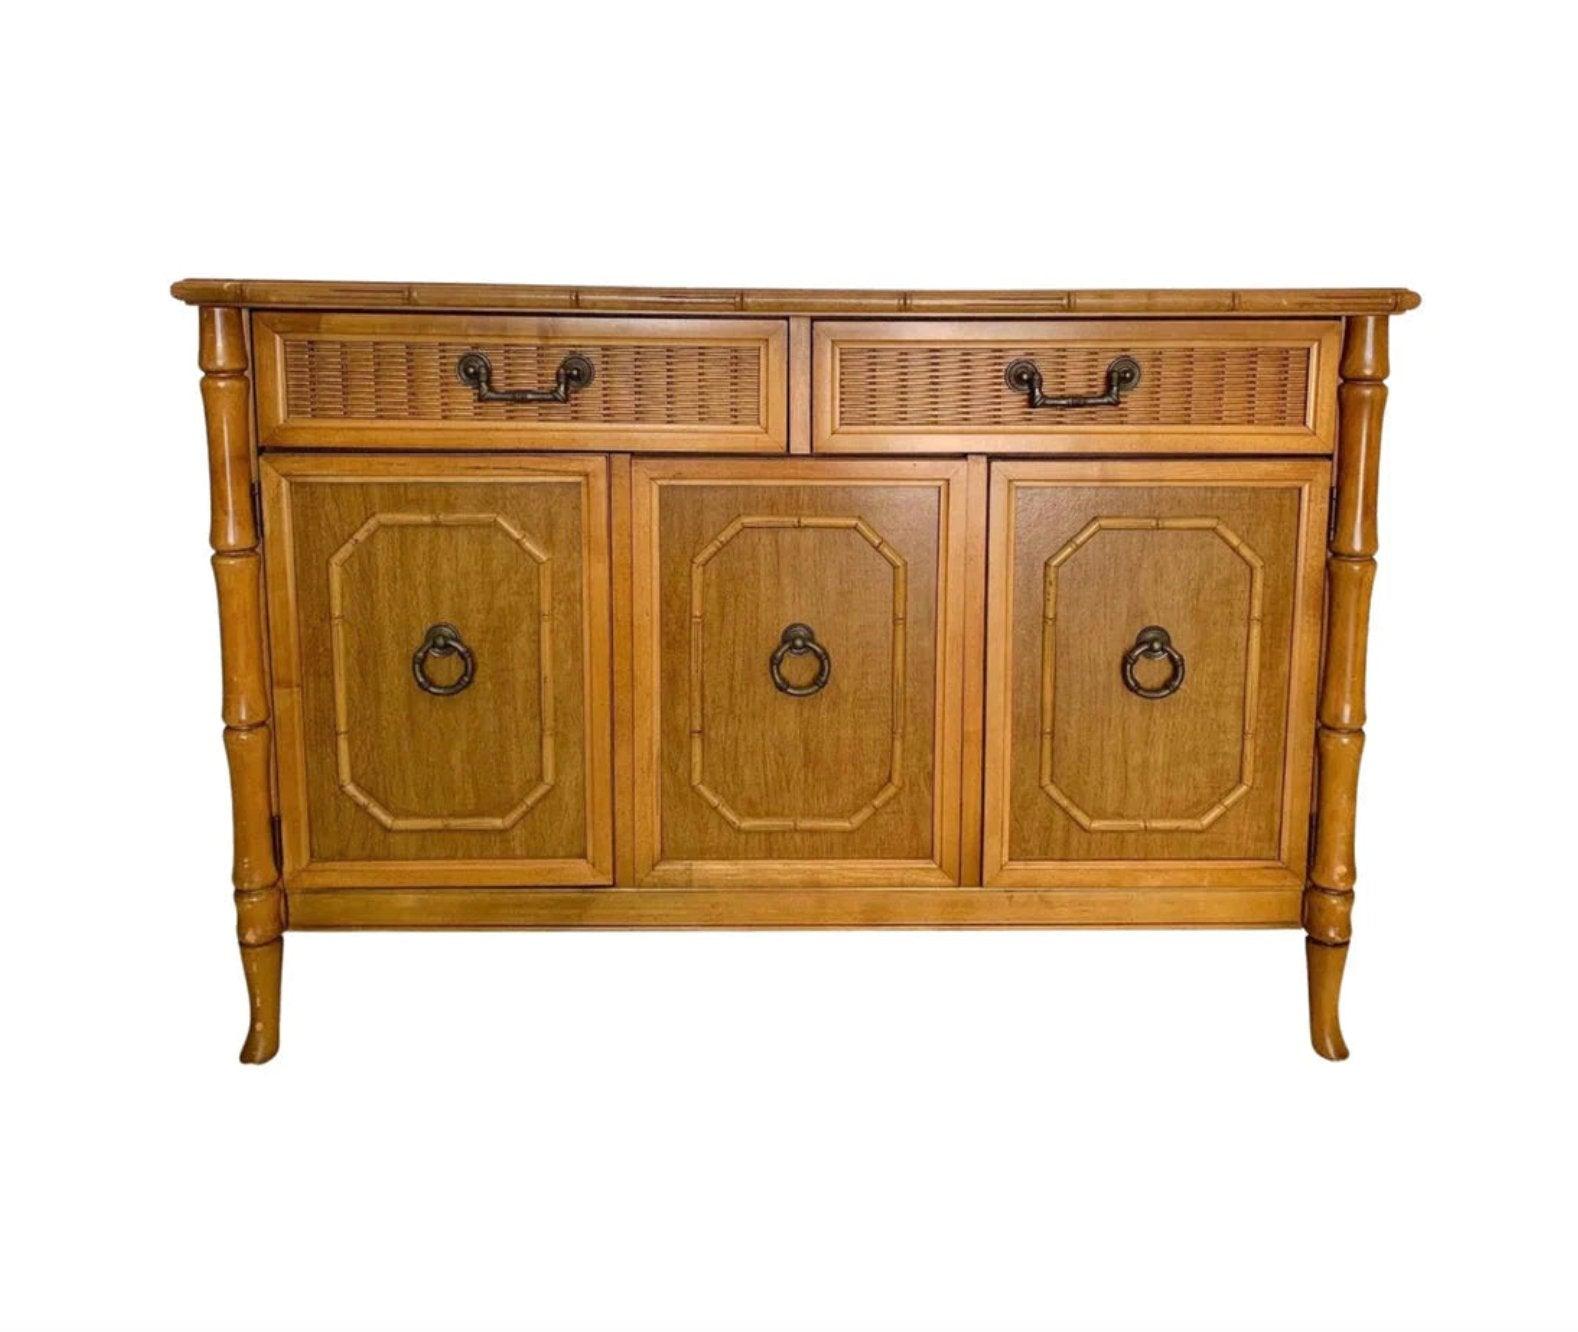 Vintage Broyhill Furniture Faux Bamboo Server Available for Custom Lacquer! - Hibiscus House